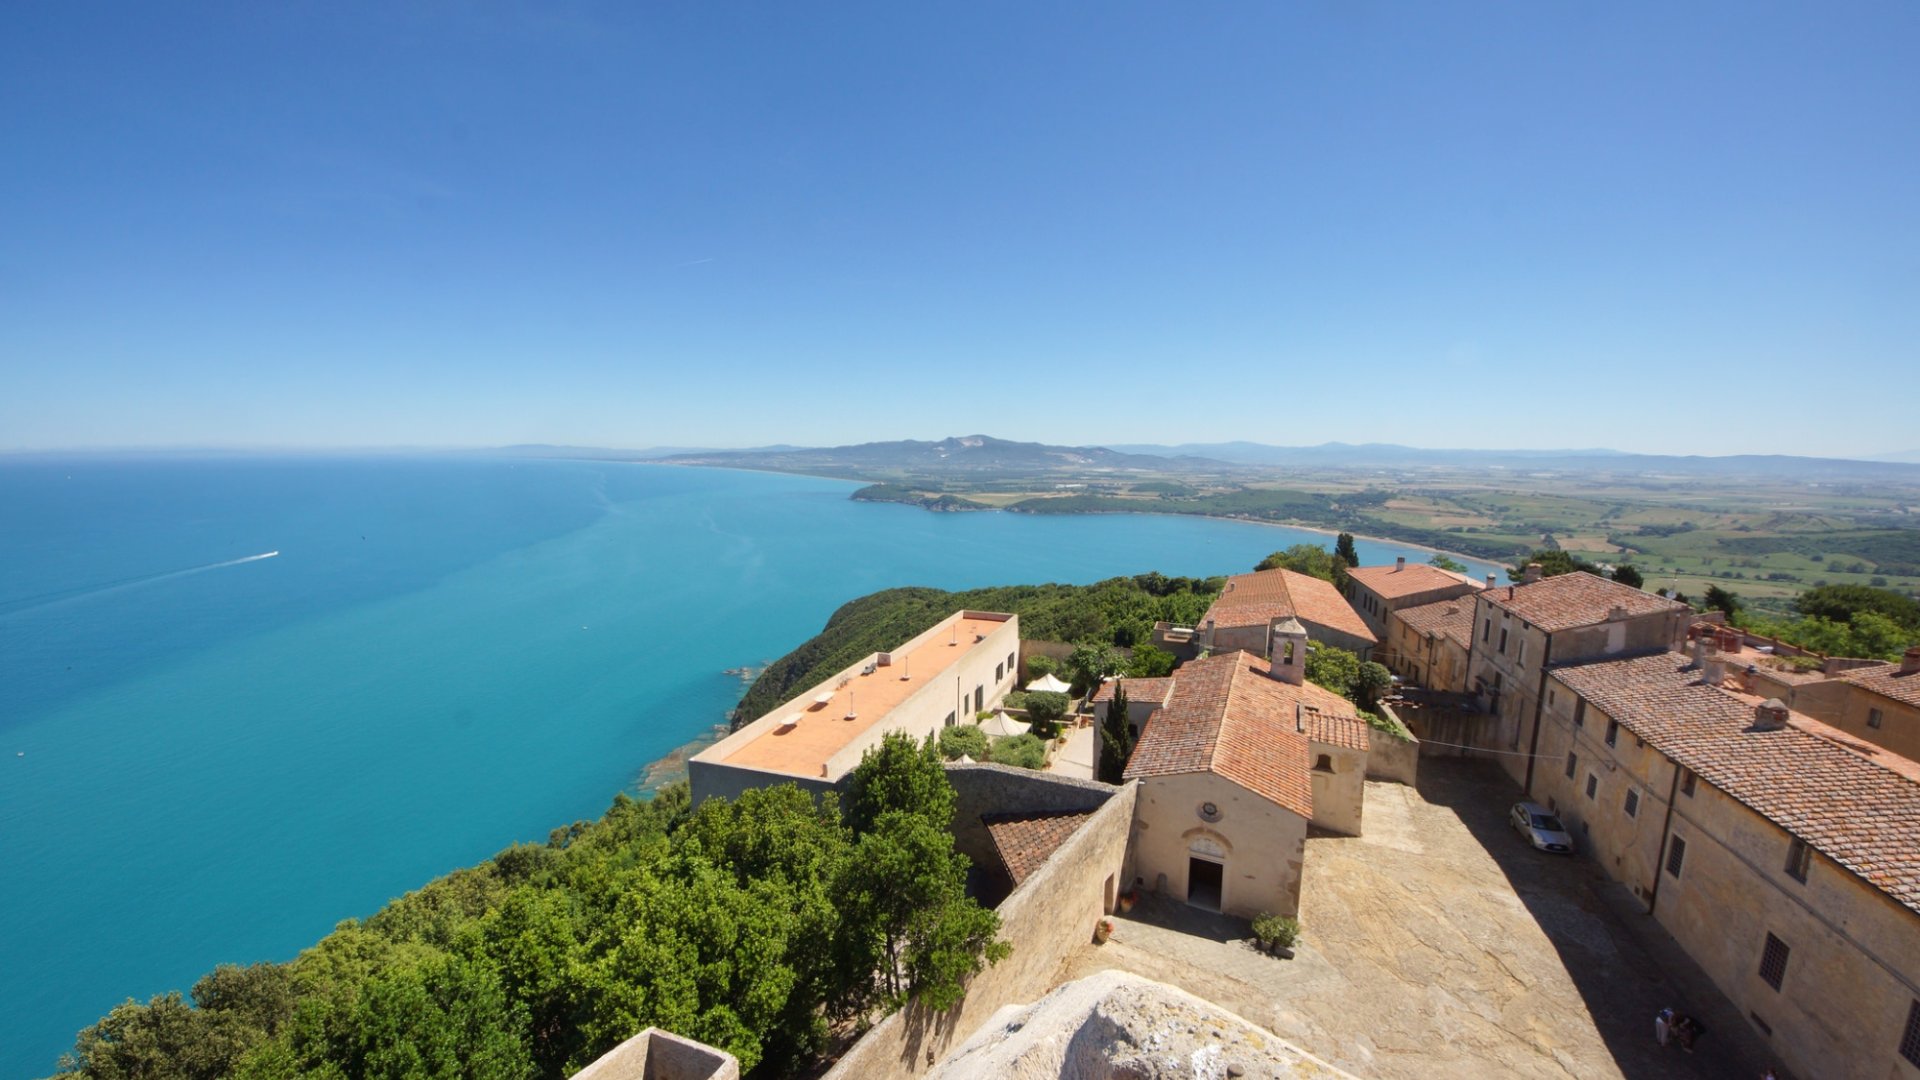 The view from the tower of Populonia